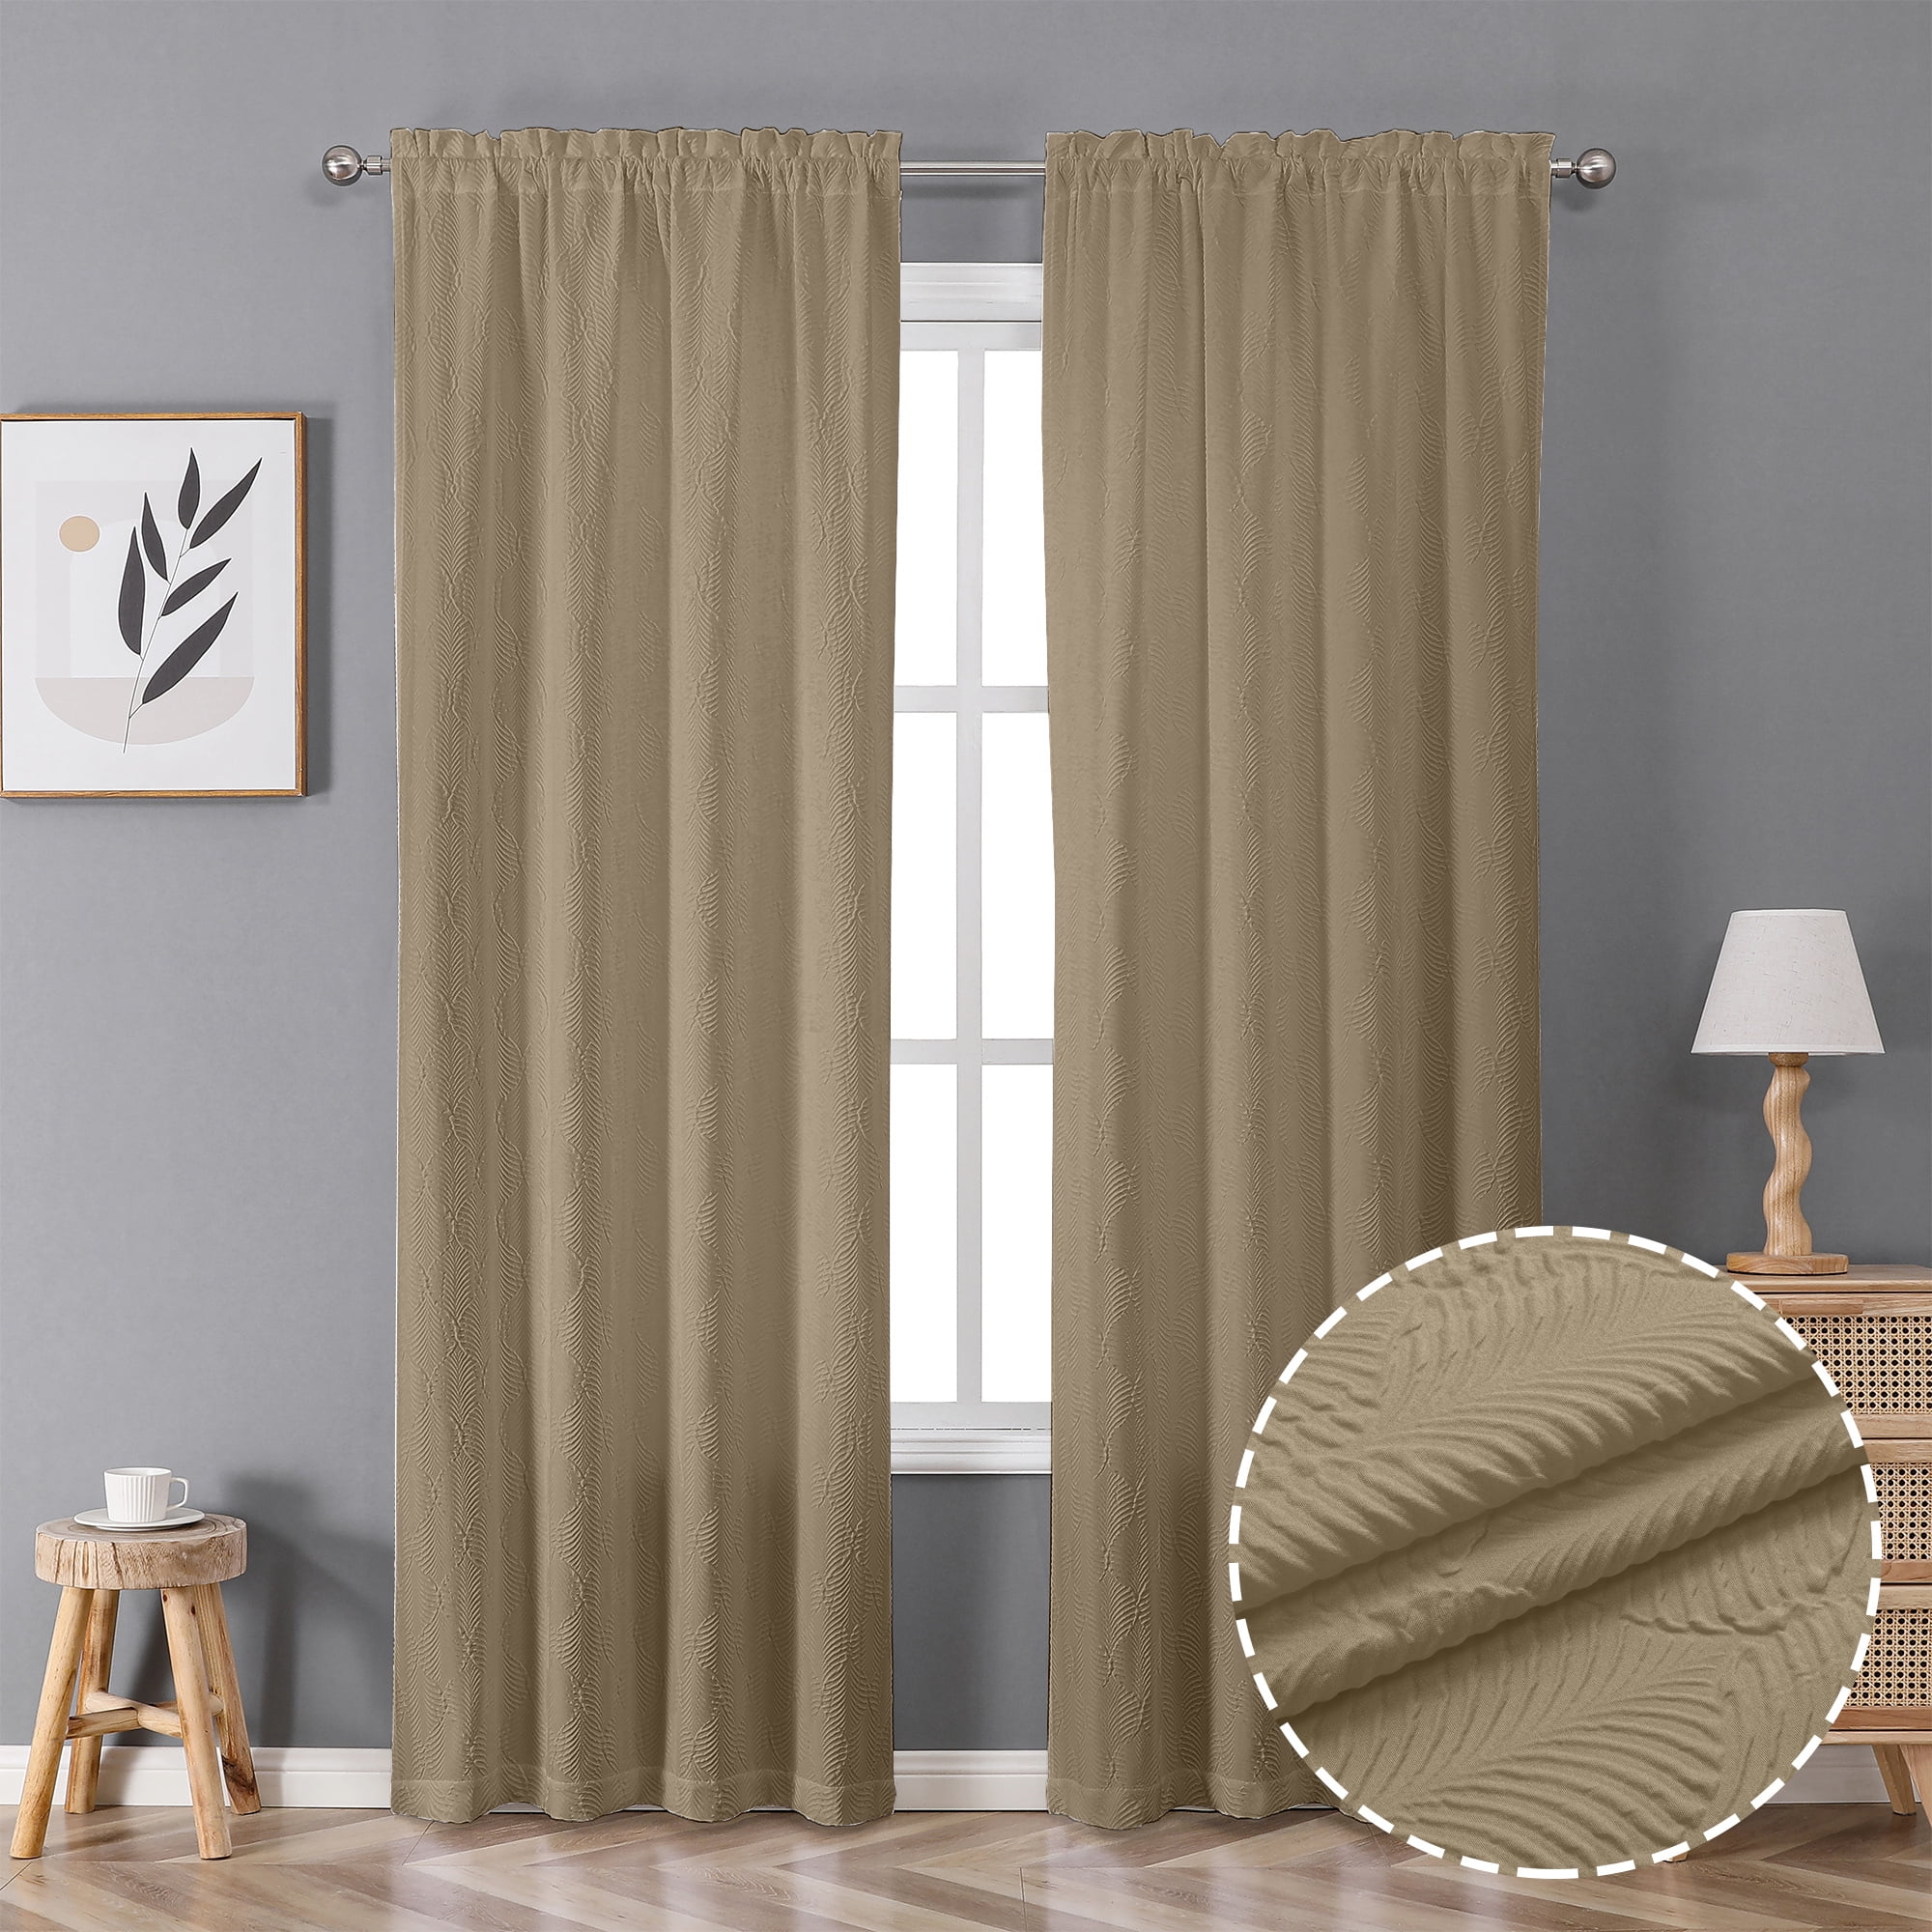 Set, 74x63 Better & Piece Panel Taupe Curtain & Solid & 4 Taupe, Homes Gardens Stitch Open Sheer